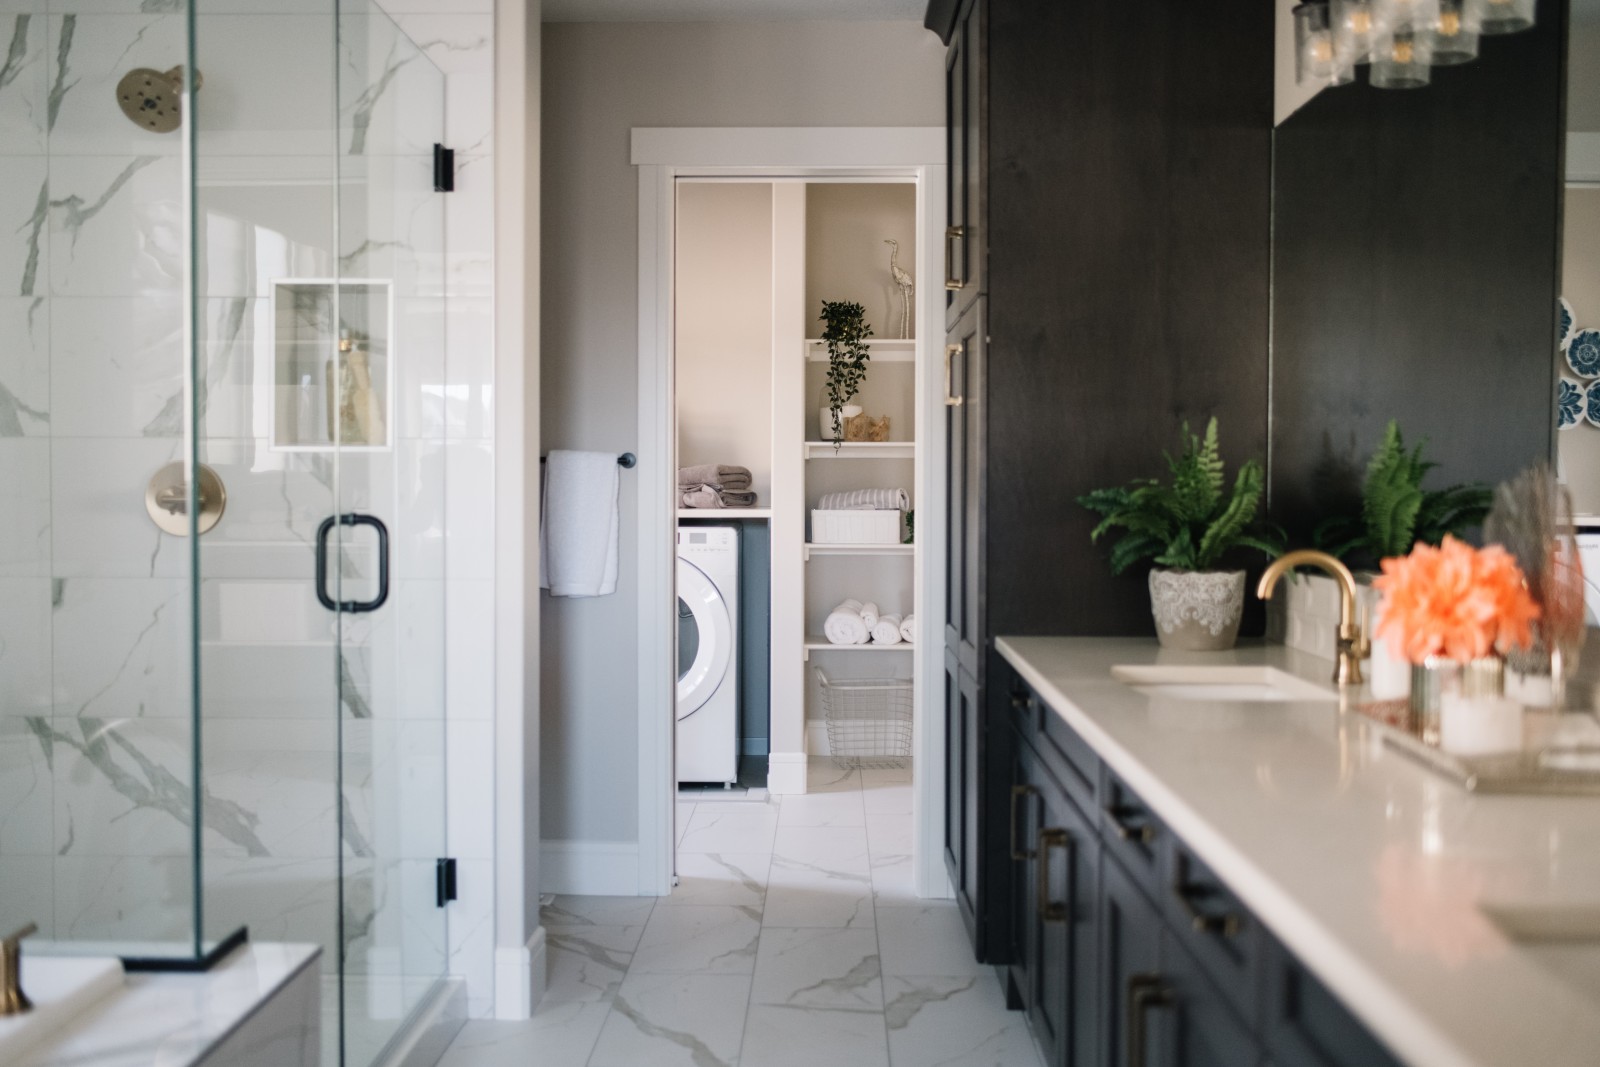 The master ensuite of the Julian showhome that features dark rich stained cabinets, a fully tiled glass enclosed shower and leads directly to the laundry room at the back of the ensuite